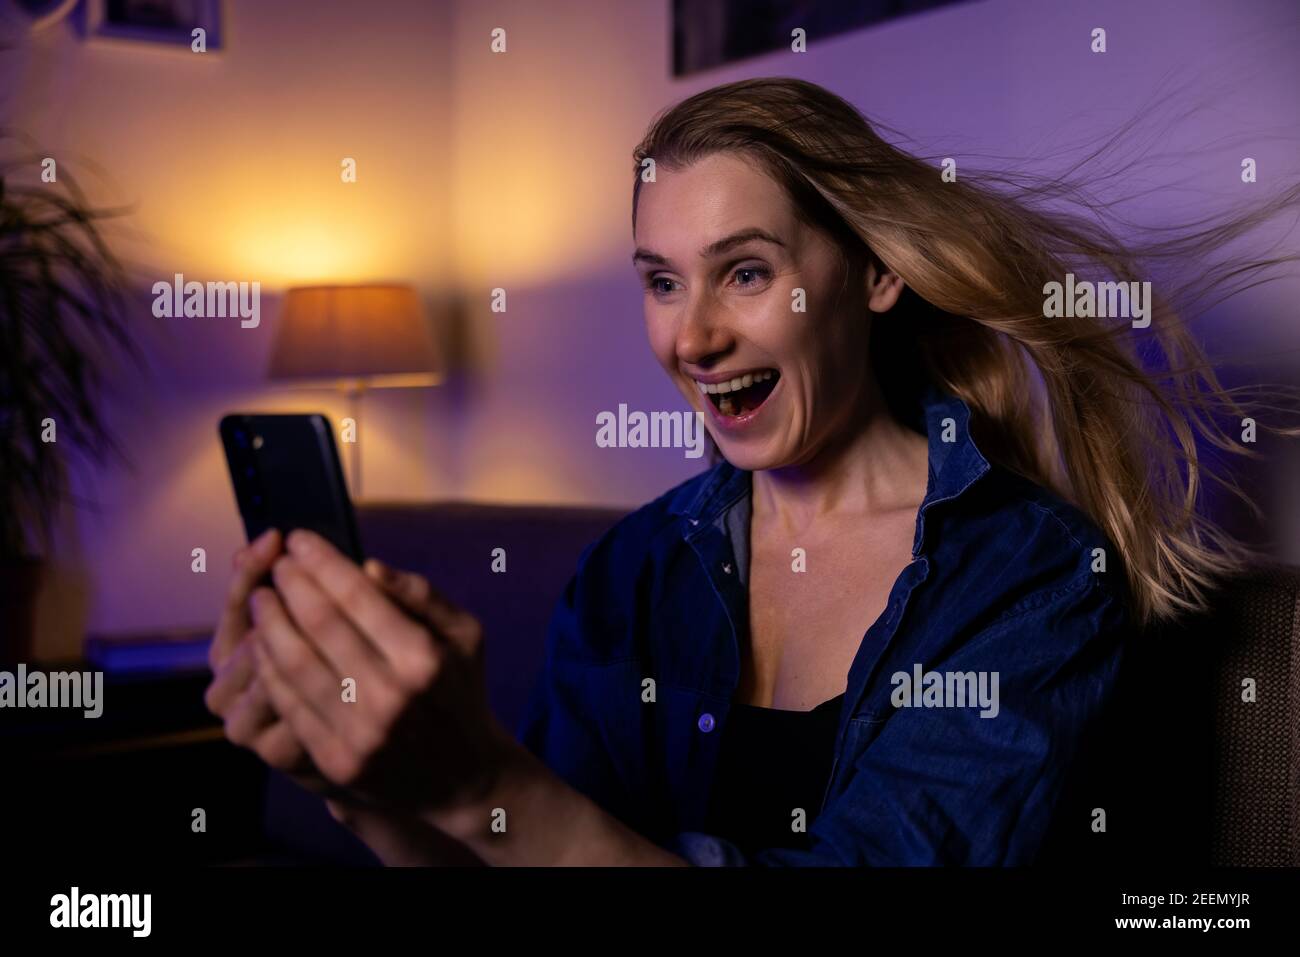 shocked surprised young woman sitting on couch and using mobile phone. blowing hair Stock Photo